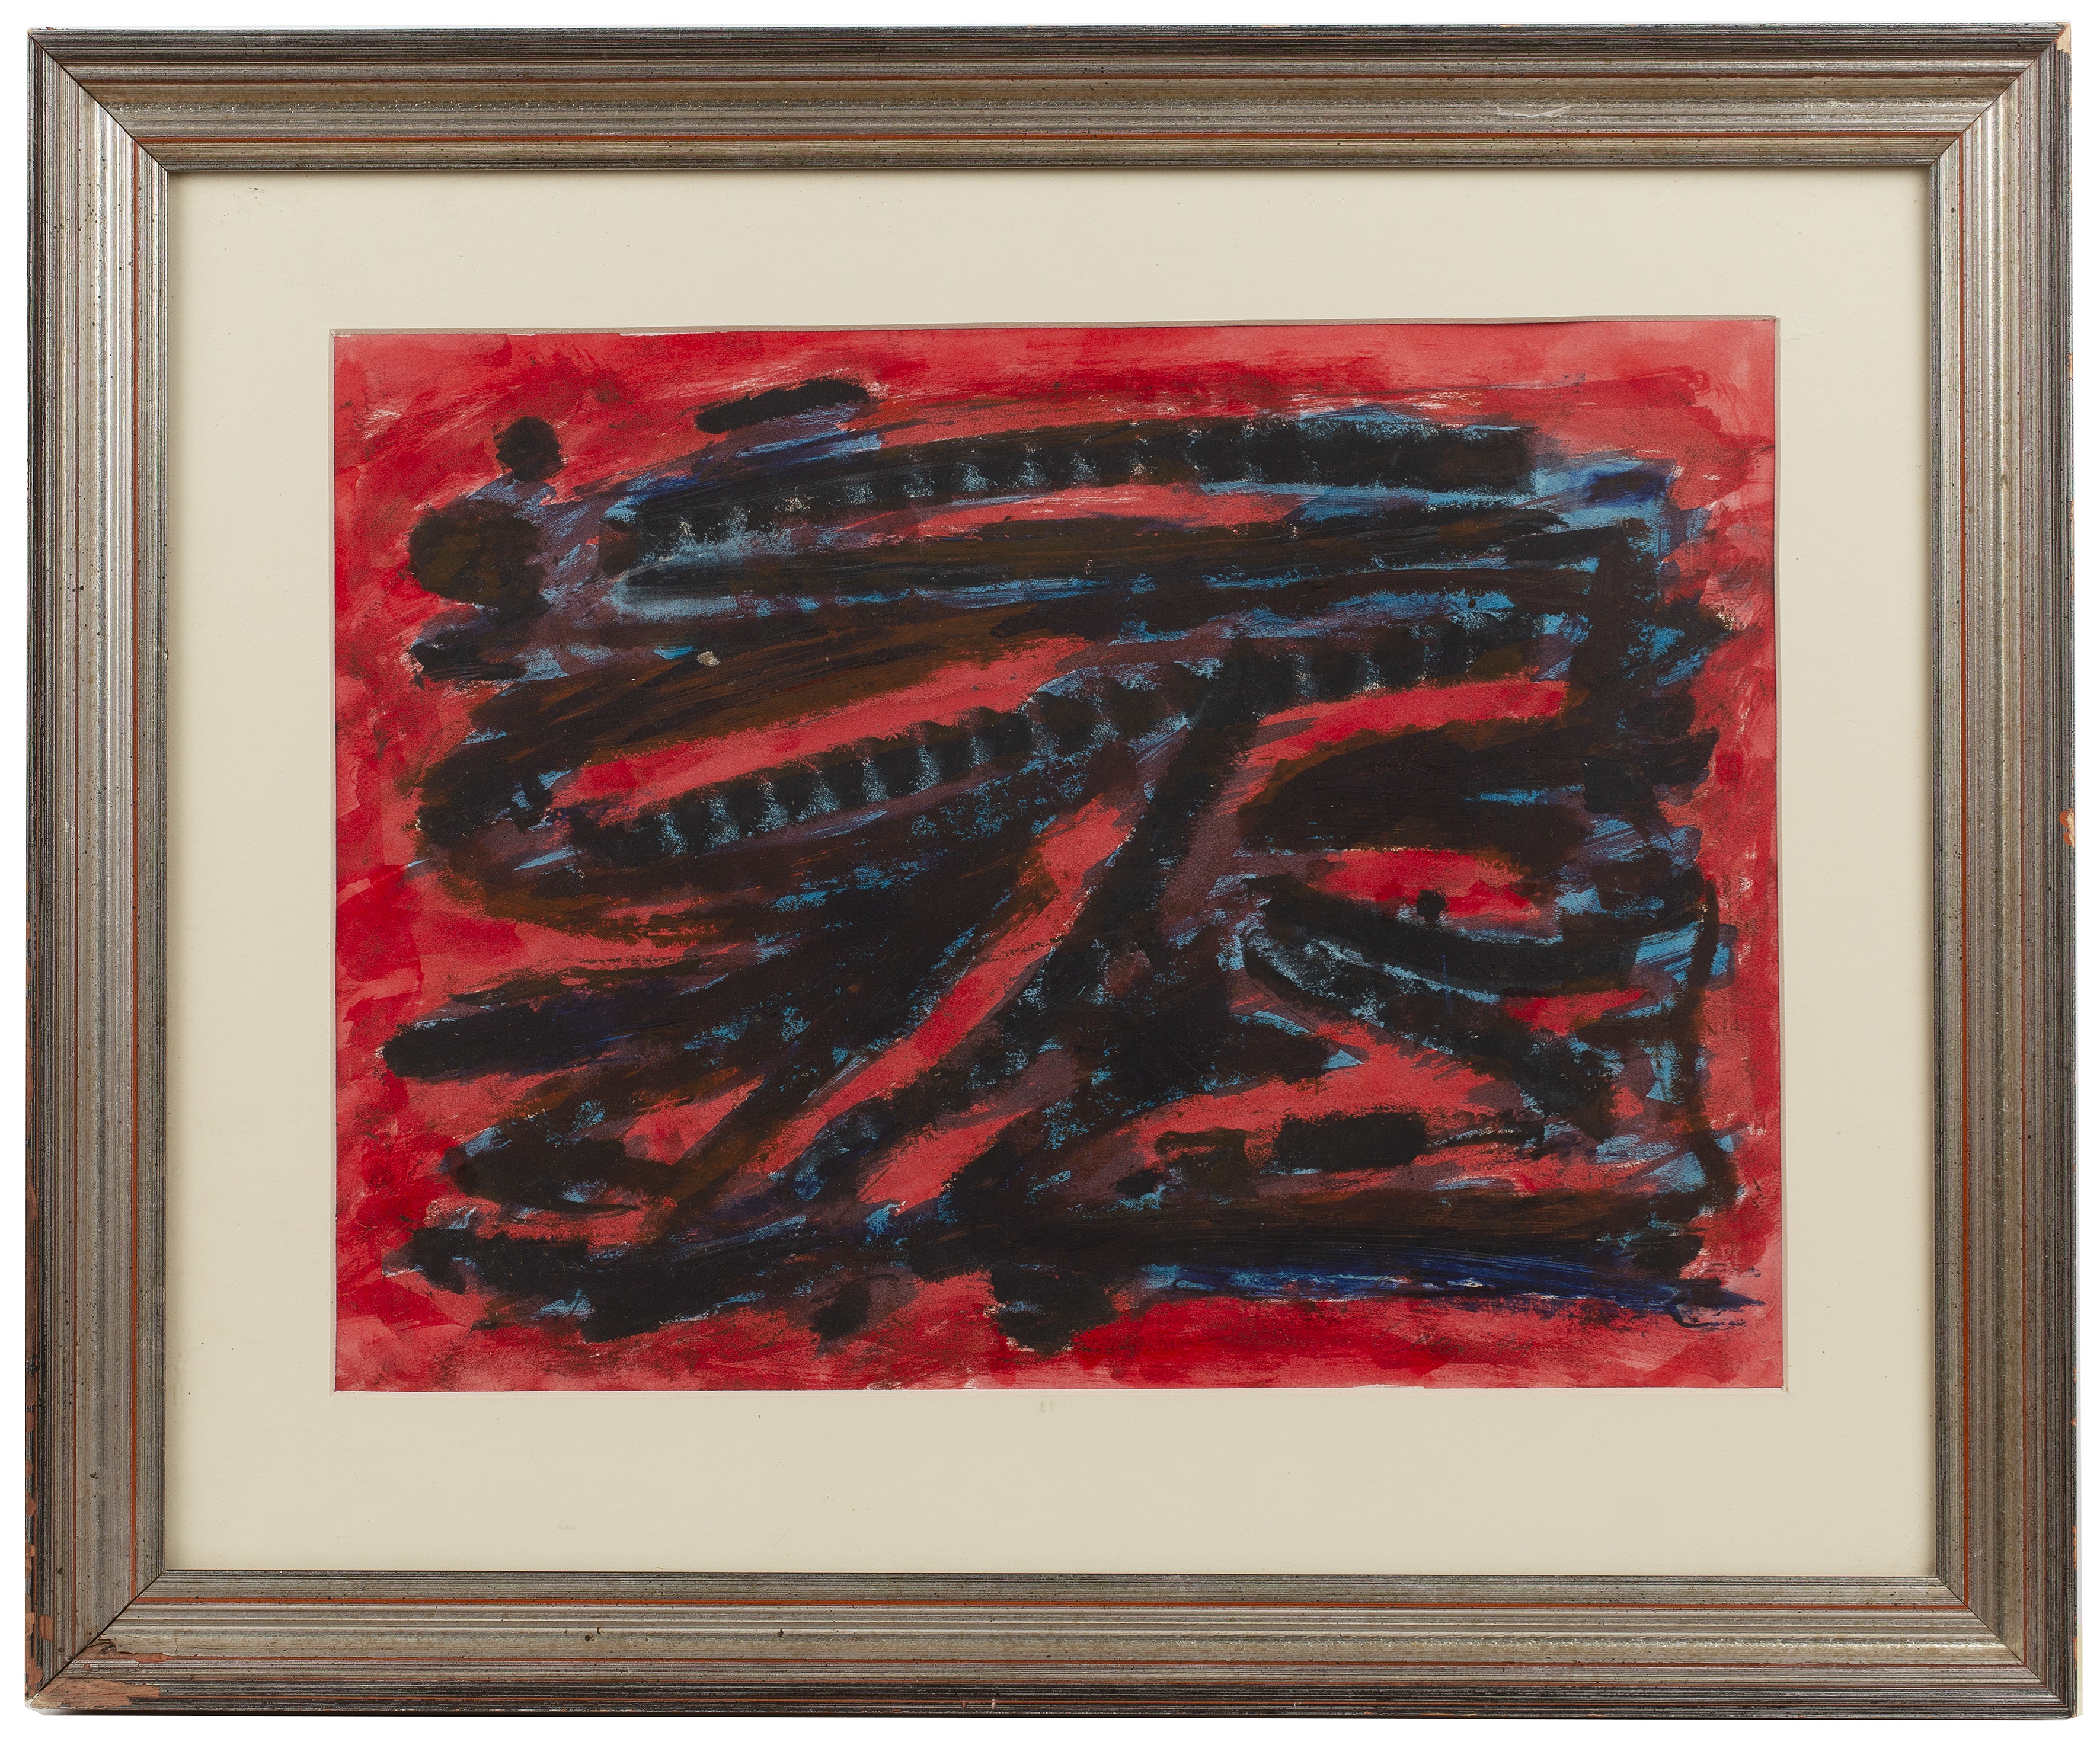 William Gear (1955-1997) 'Untitled', mixed media, signed and dated 1994 lower right, 29.5cm x 40cm - Image 2 of 3